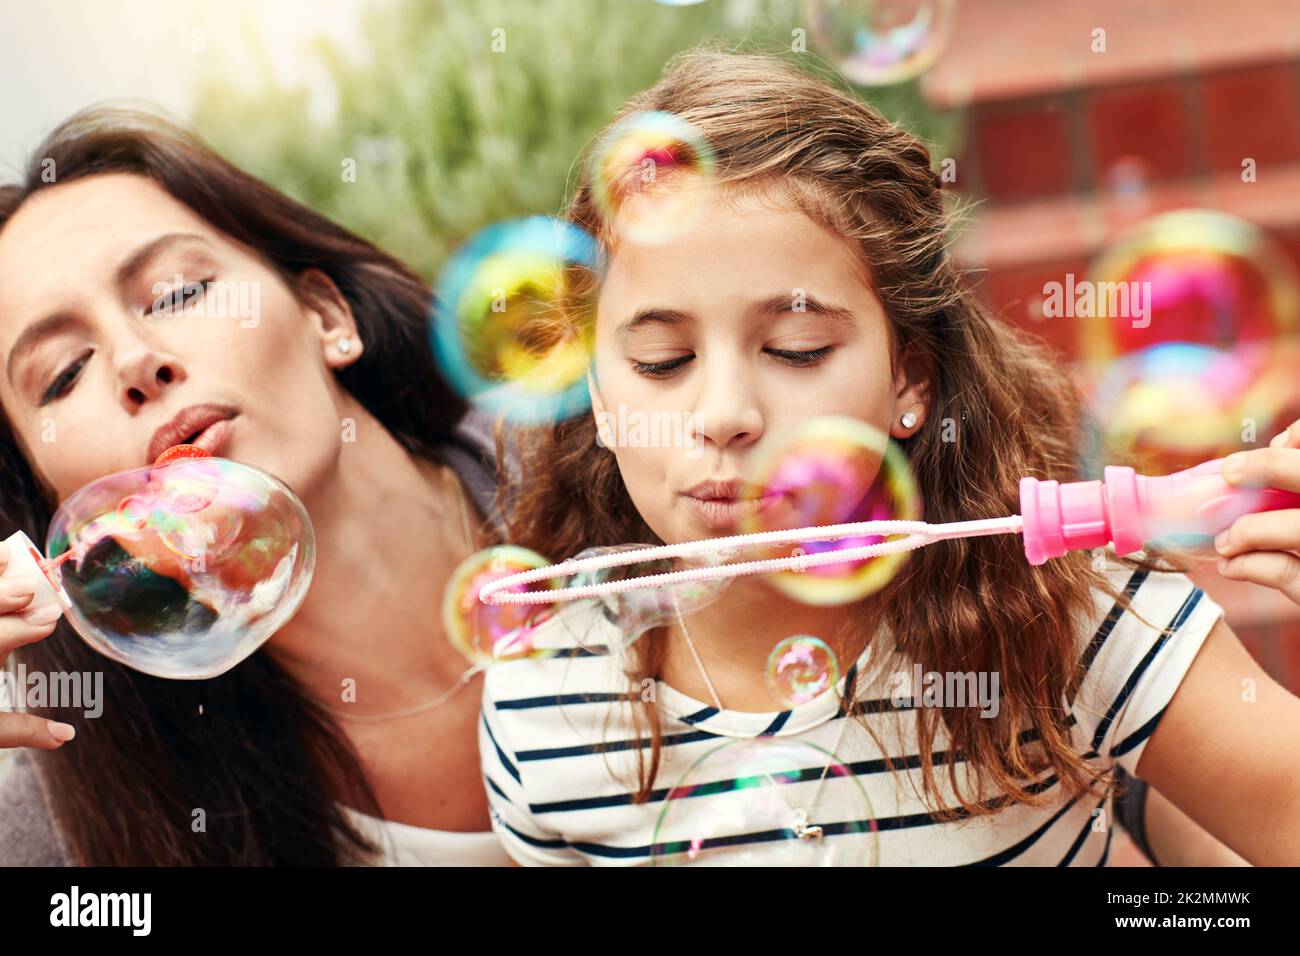 Having bubbles full of fun. A happy mother and daughter spending time together outdoors. Stock Photo